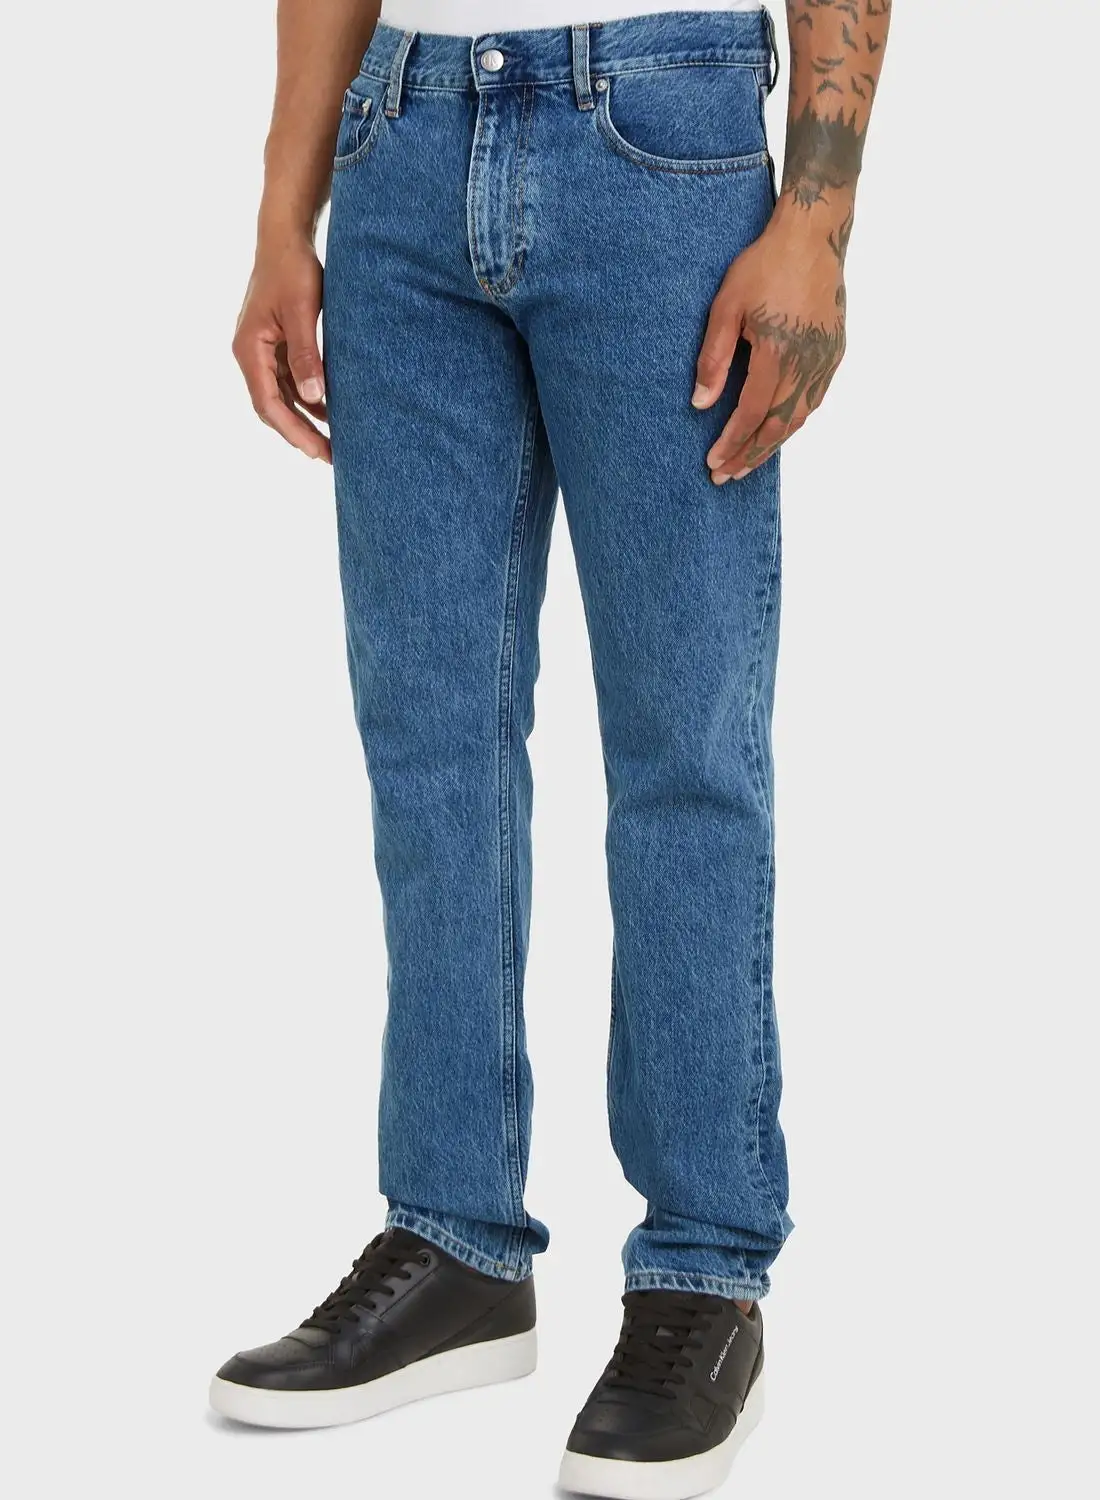 Calvin Klein Jeans Light Wash Straight Fit Jeans